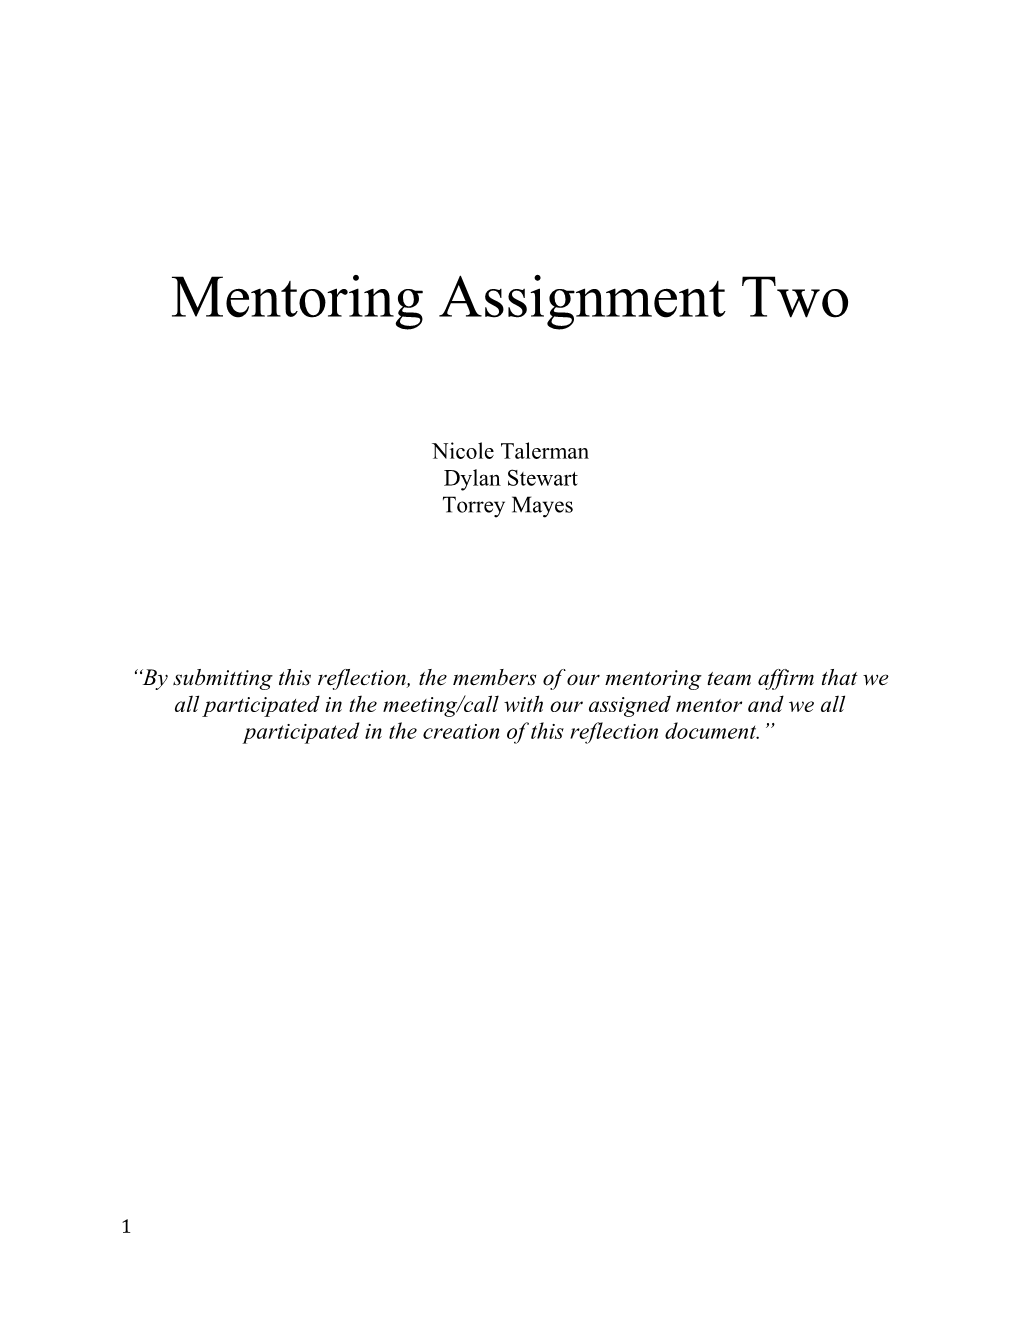 Mentoring Assignment Two